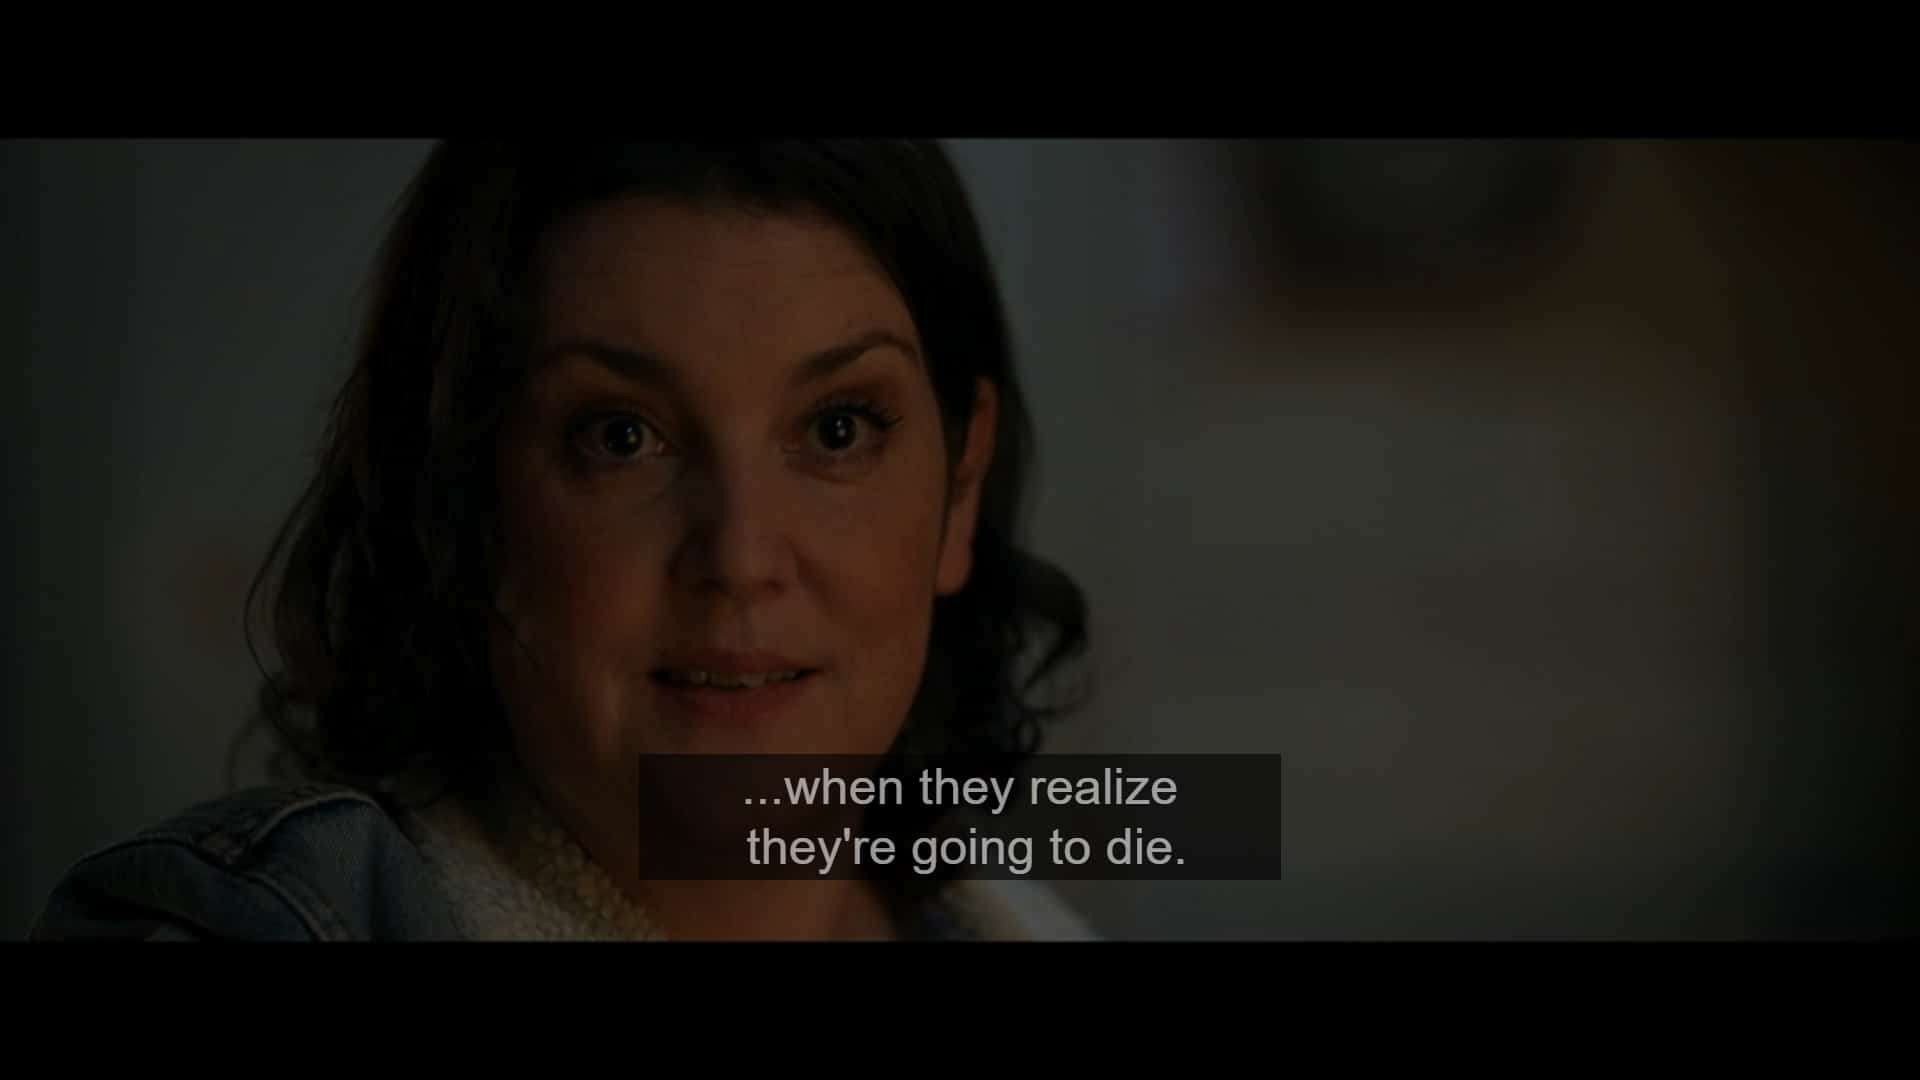 Shauna (Melanie Lynskey) explaining what it is like to look at someone who knows they are going to die